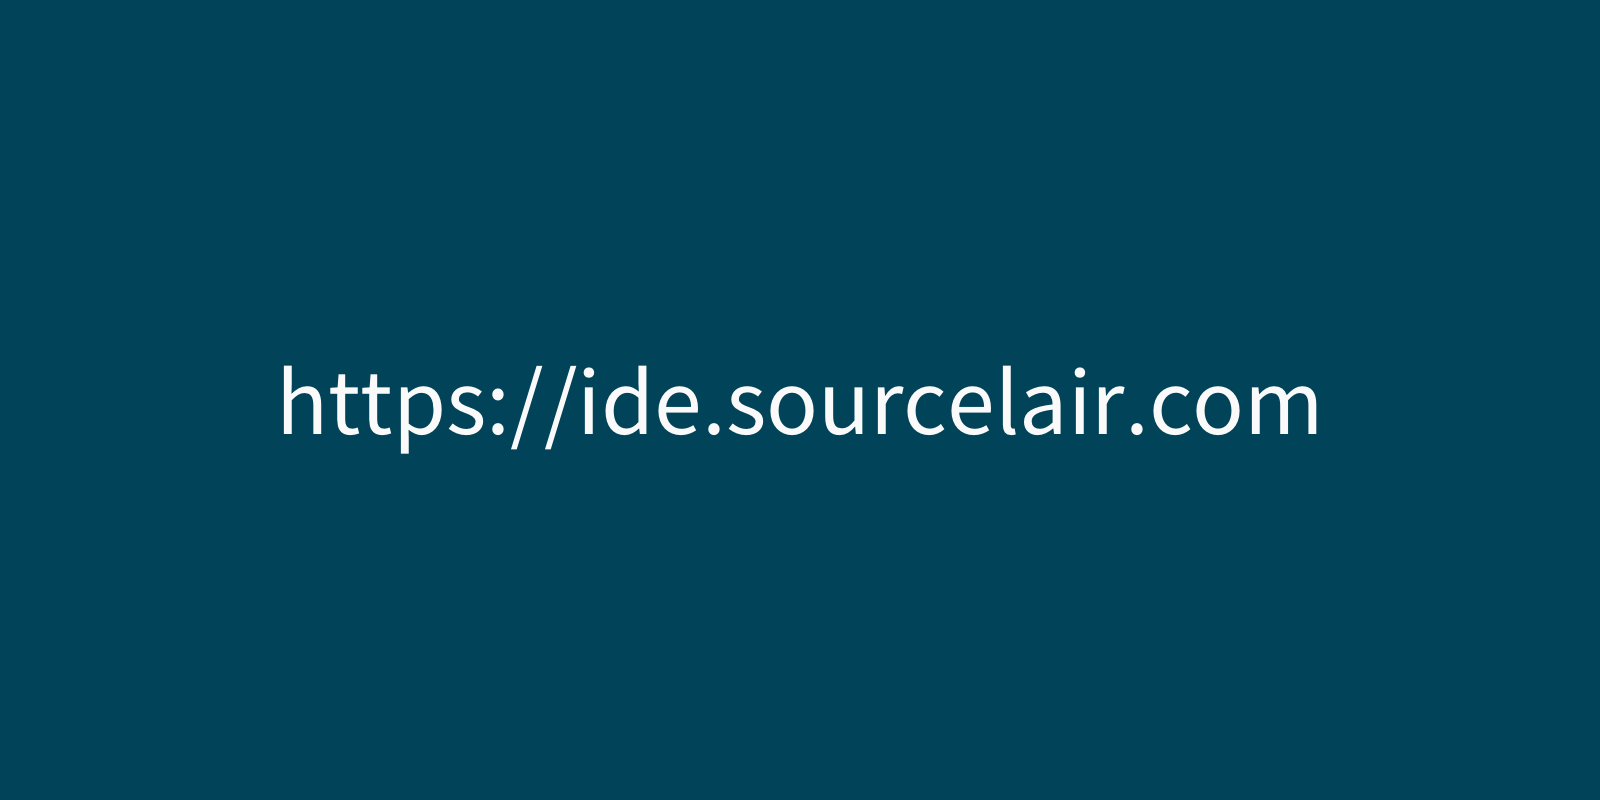 A new domain name for SourceLair IDE and a few updates